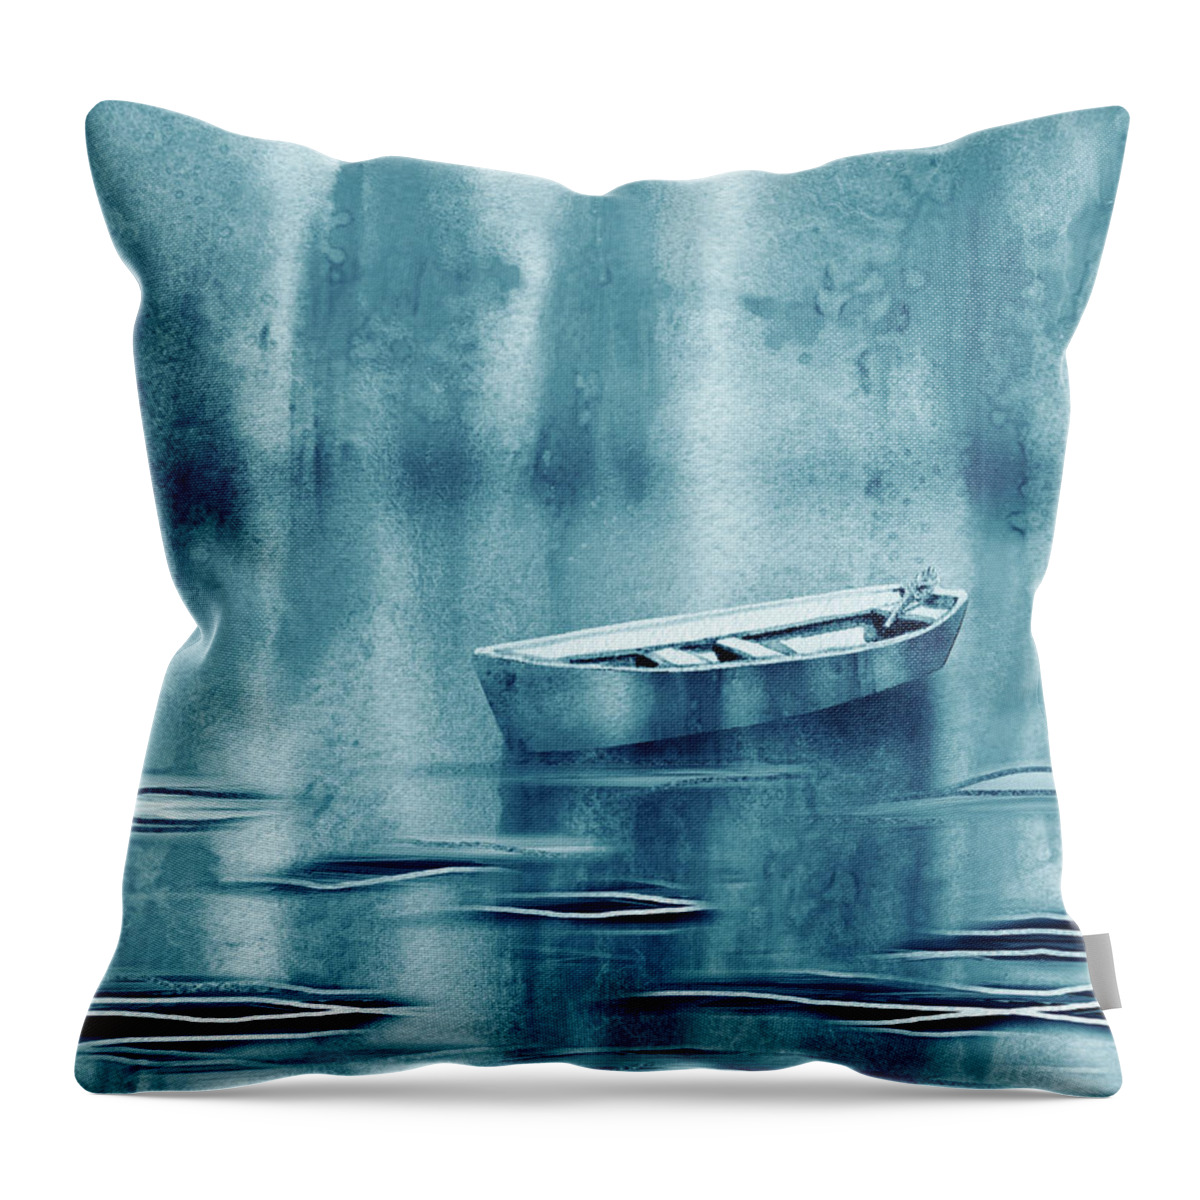 Teal Blue Calm Waters Boat Throw Pillow featuring the painting Teal Blue Waters Of The Lake With Single Boat Drifting by Irina Sztukowski